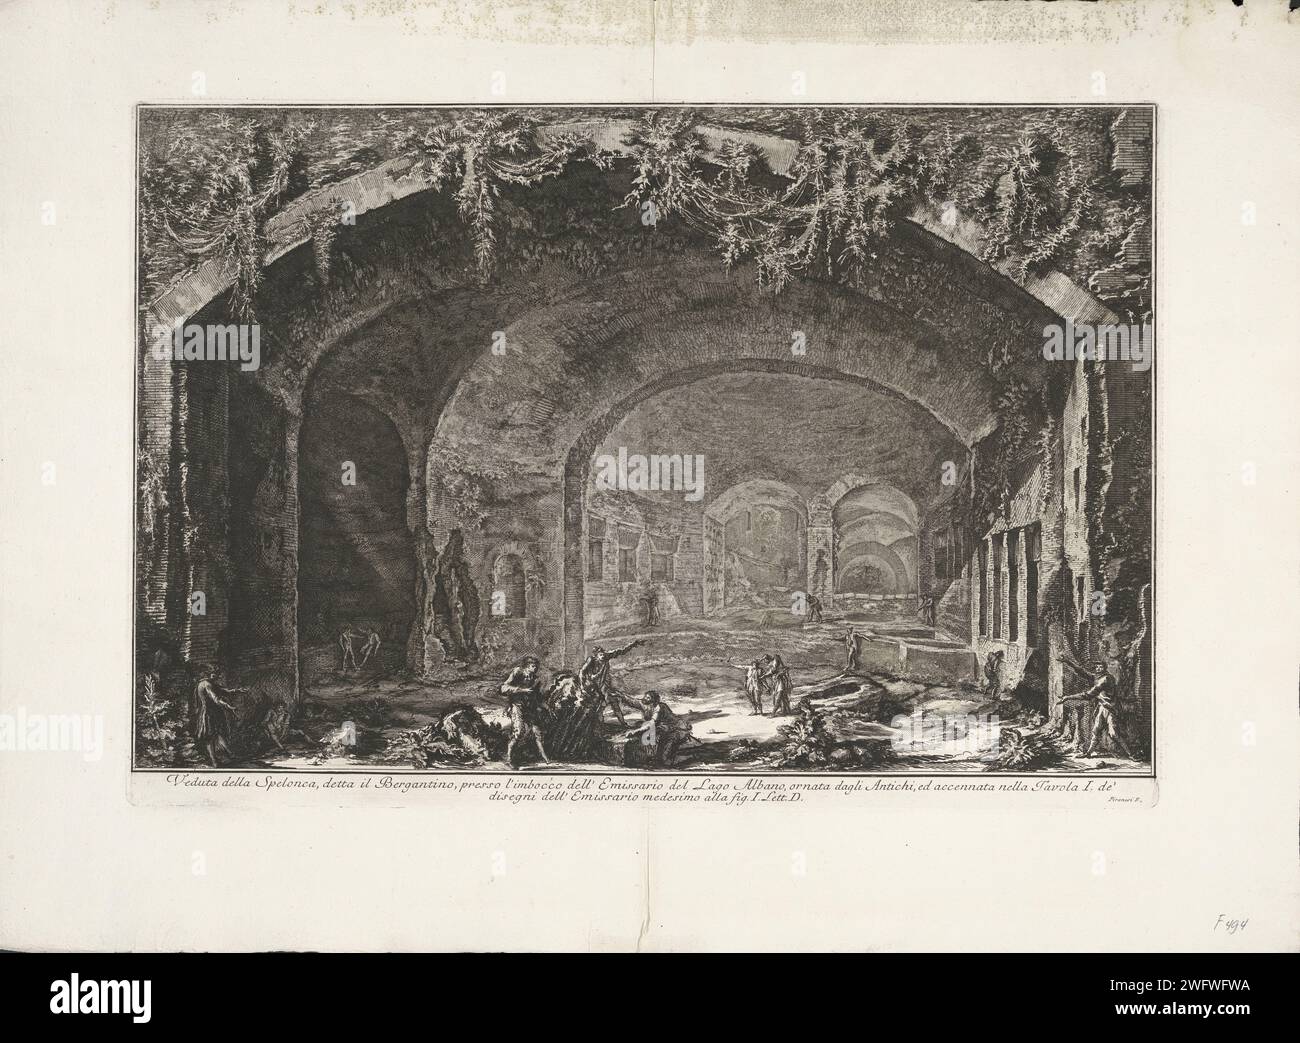 Cave named 'Il Bergantino' at Meer van Albano, Giovanni Battista Piranesi, 1762 print Face in a cave called 'Il Bergantino' at Lake Albano. Title in the end margin. Numbered in the top left: Ii. Rome paper etching cave, grotto More from Albano (Lazio) Stock Photo